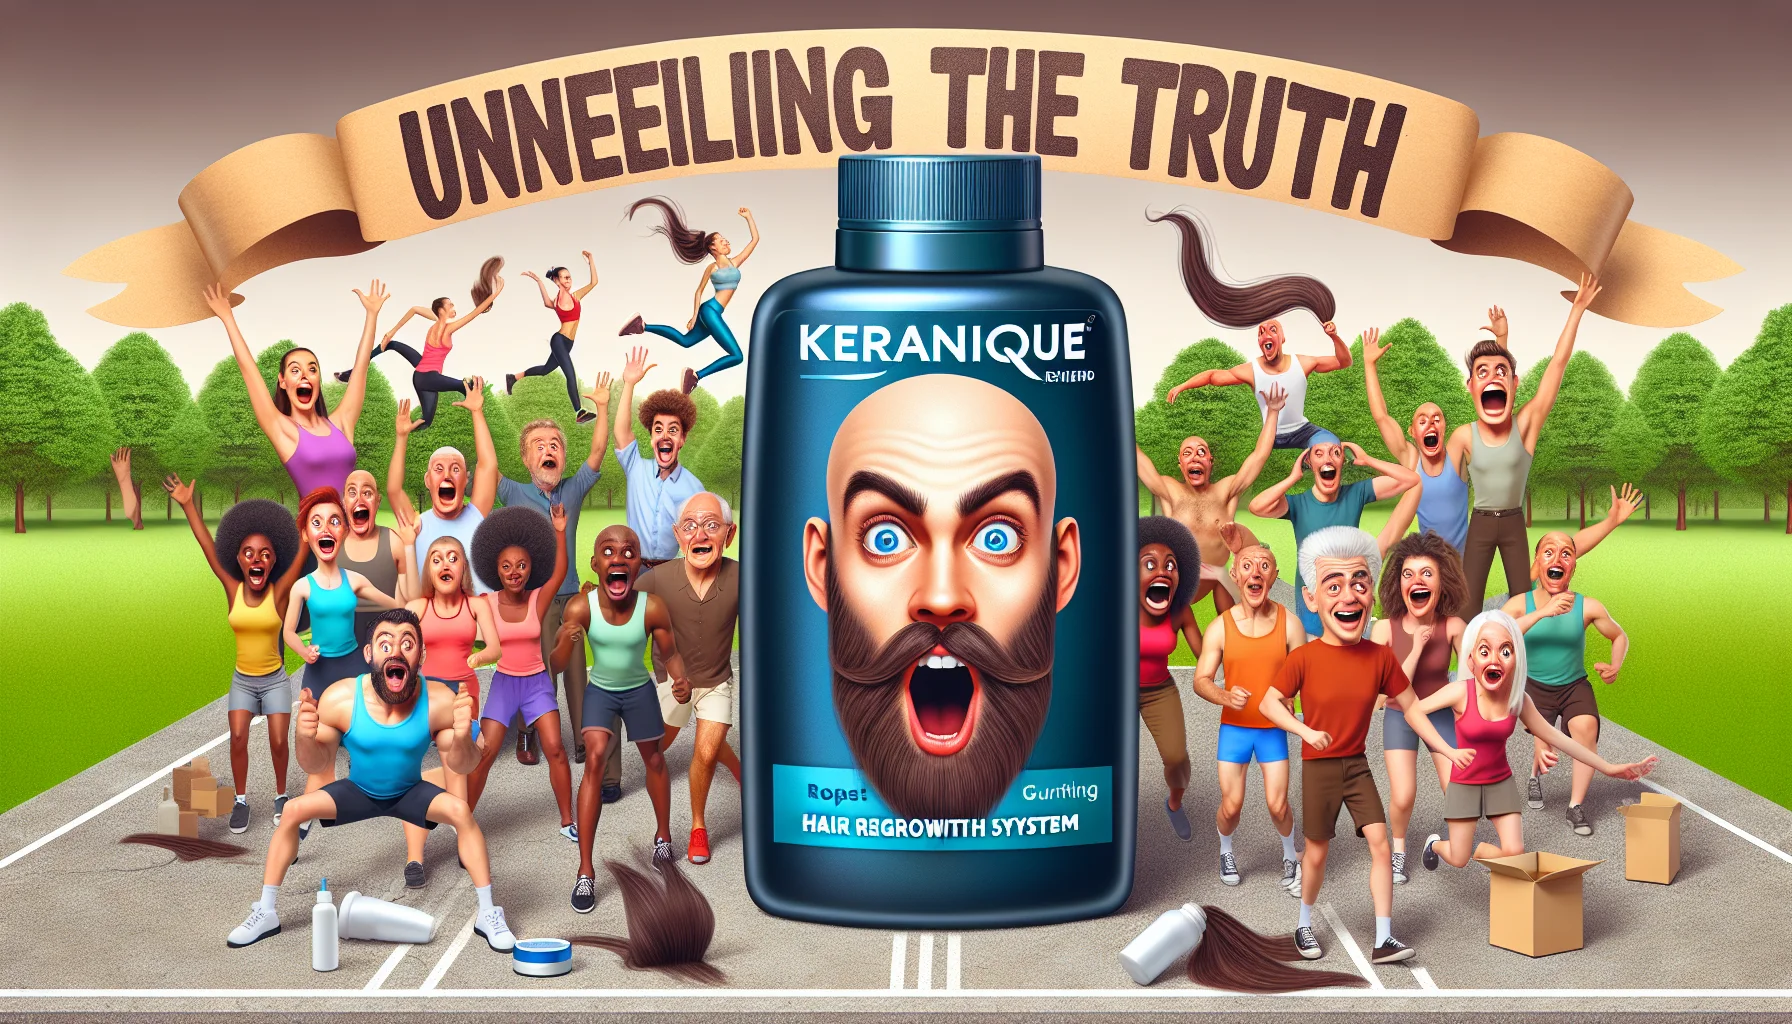 An engaging and humorous scene representing the topic of a hair regrowth system review. A foreground element features an oversized eye-catching bottle of the Keranique Hair Regrowth System. Next to it, an assorted comically exaggerated group of people of diverse descents and genders showing surprise and amazement. In the background, various individuals are enthusiastically exercising in an open park setting, prompting a healthy lifestyle. The words 'Unveiling the Truth: Keranique Hair Regrowth System Reviewed' are written in a fun and bold font at the top edge of the scene.